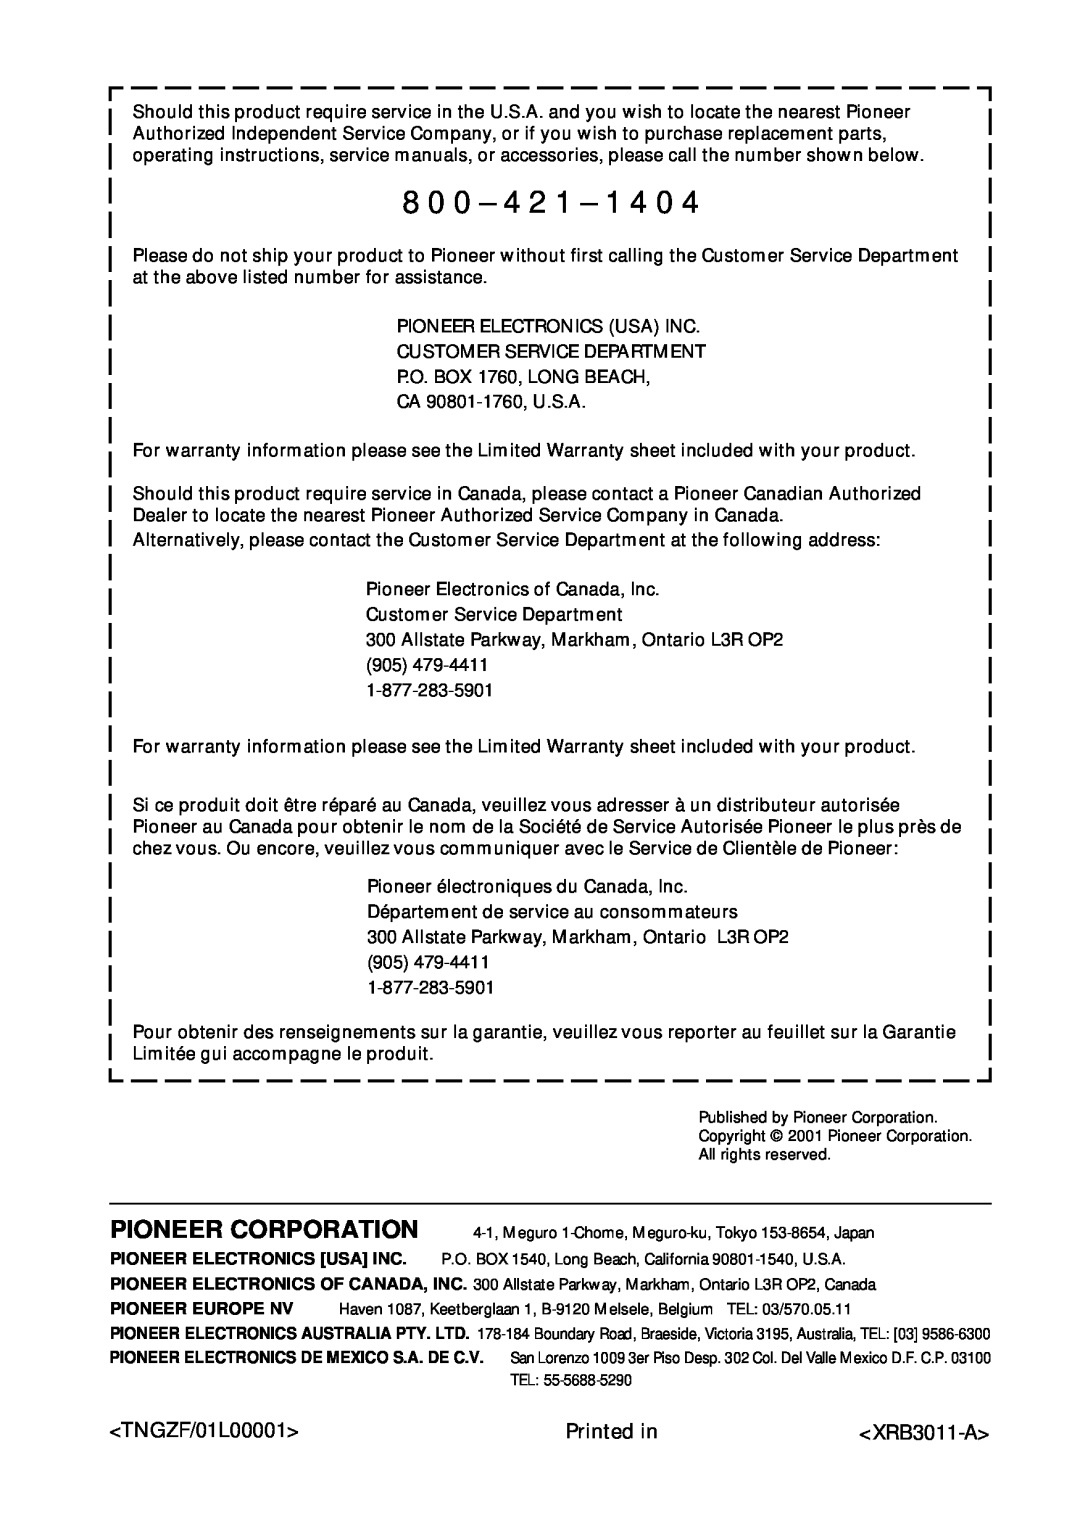 Pioneer VSX-D411 operating instructions 8 0 0 – 4 2 1 – 1 4 0, <TNGZF/01L00001>, Printed in, <XRB3011-A> 